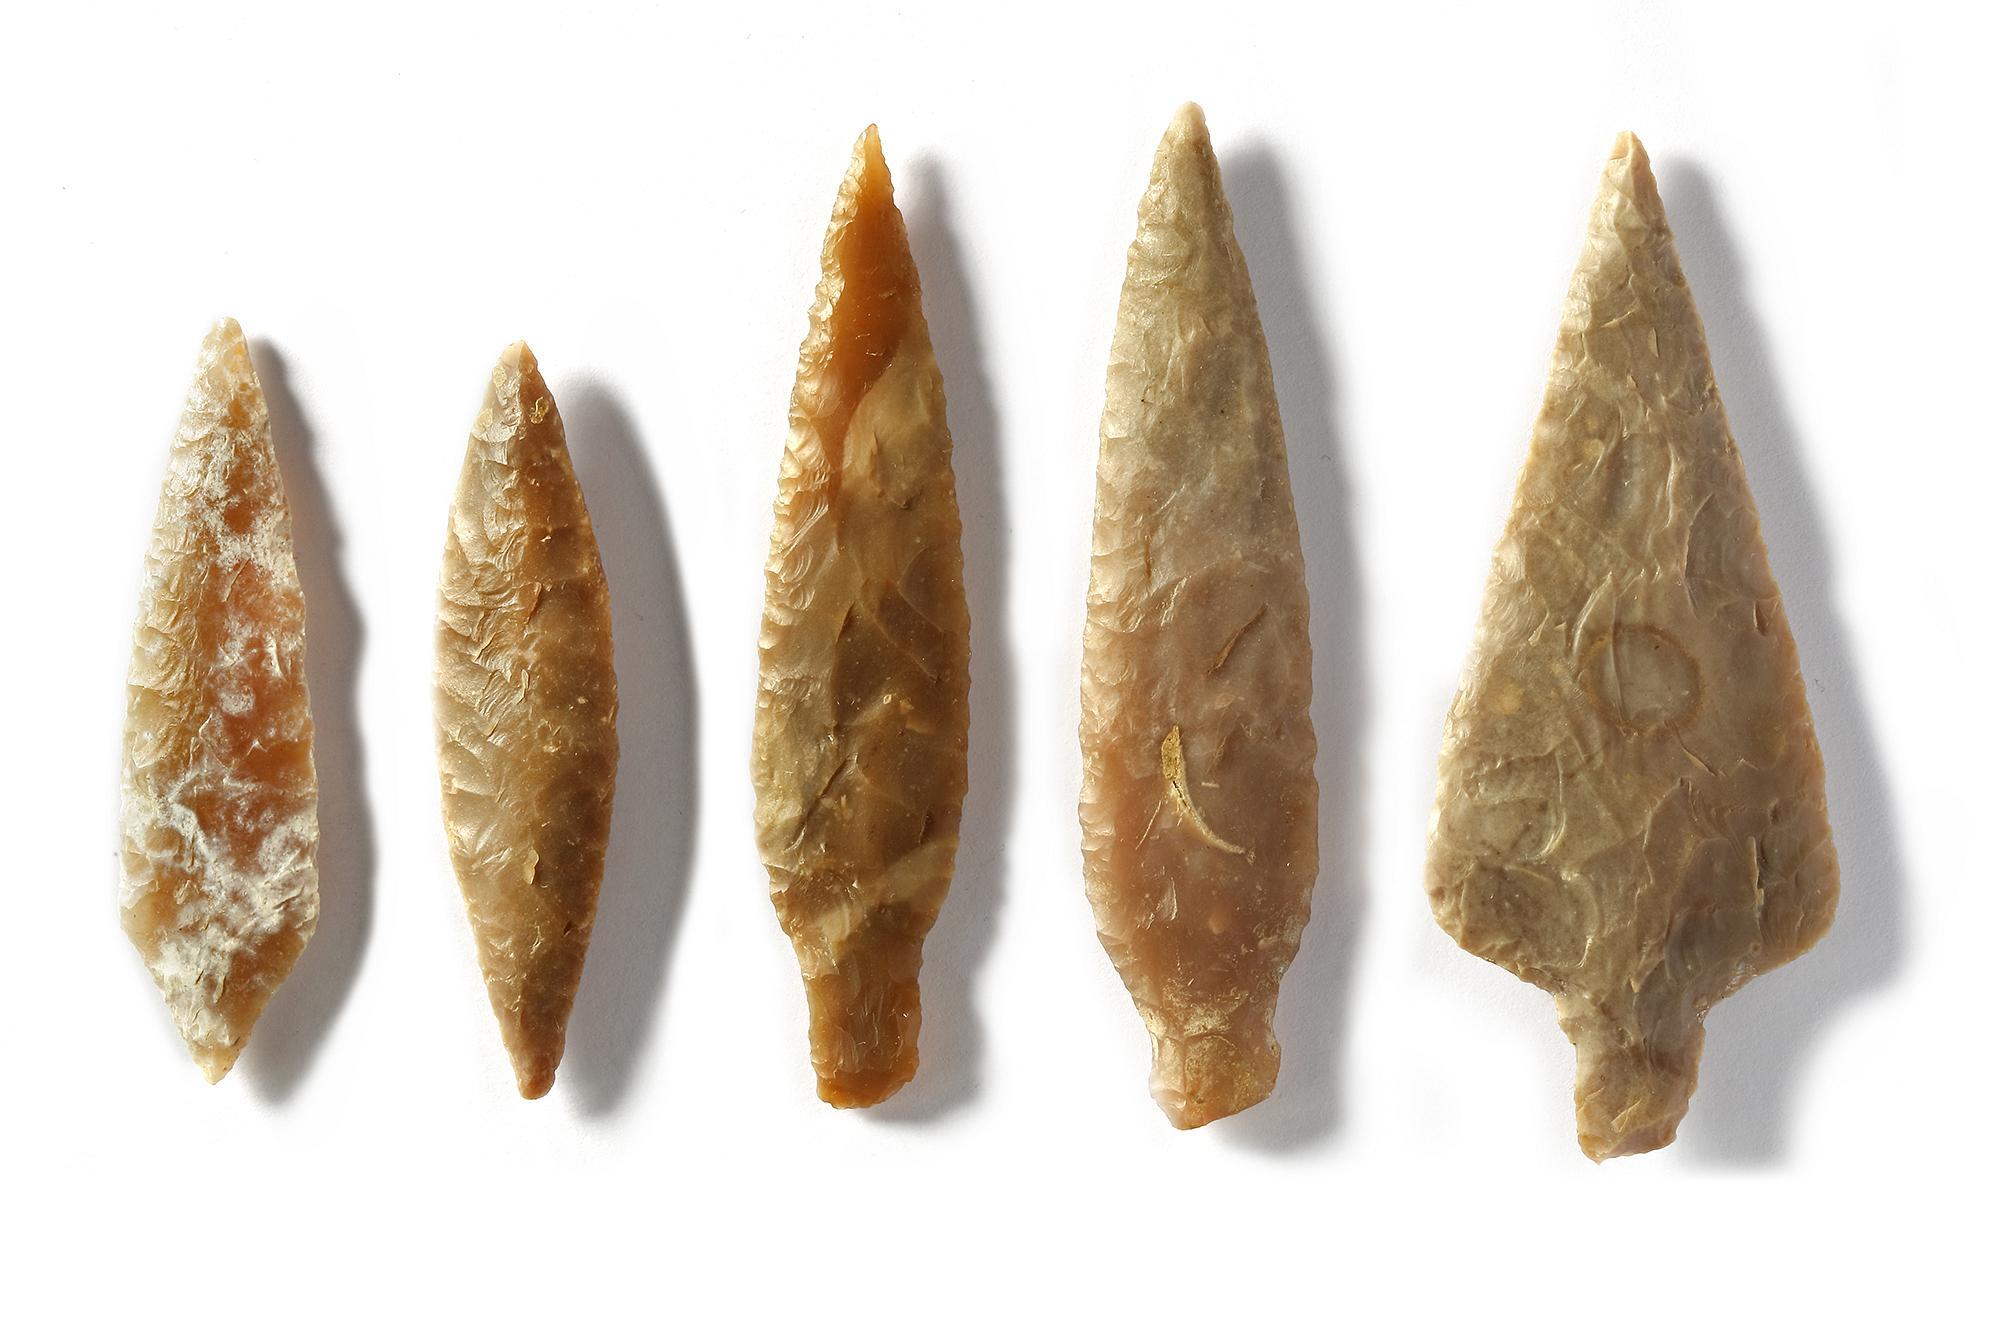 A STONE AGE NEOLITHIC ARROWHEAD COLLECTION, CIRCA 4TH MILLENNIUM B.C. - Image 2 of 3